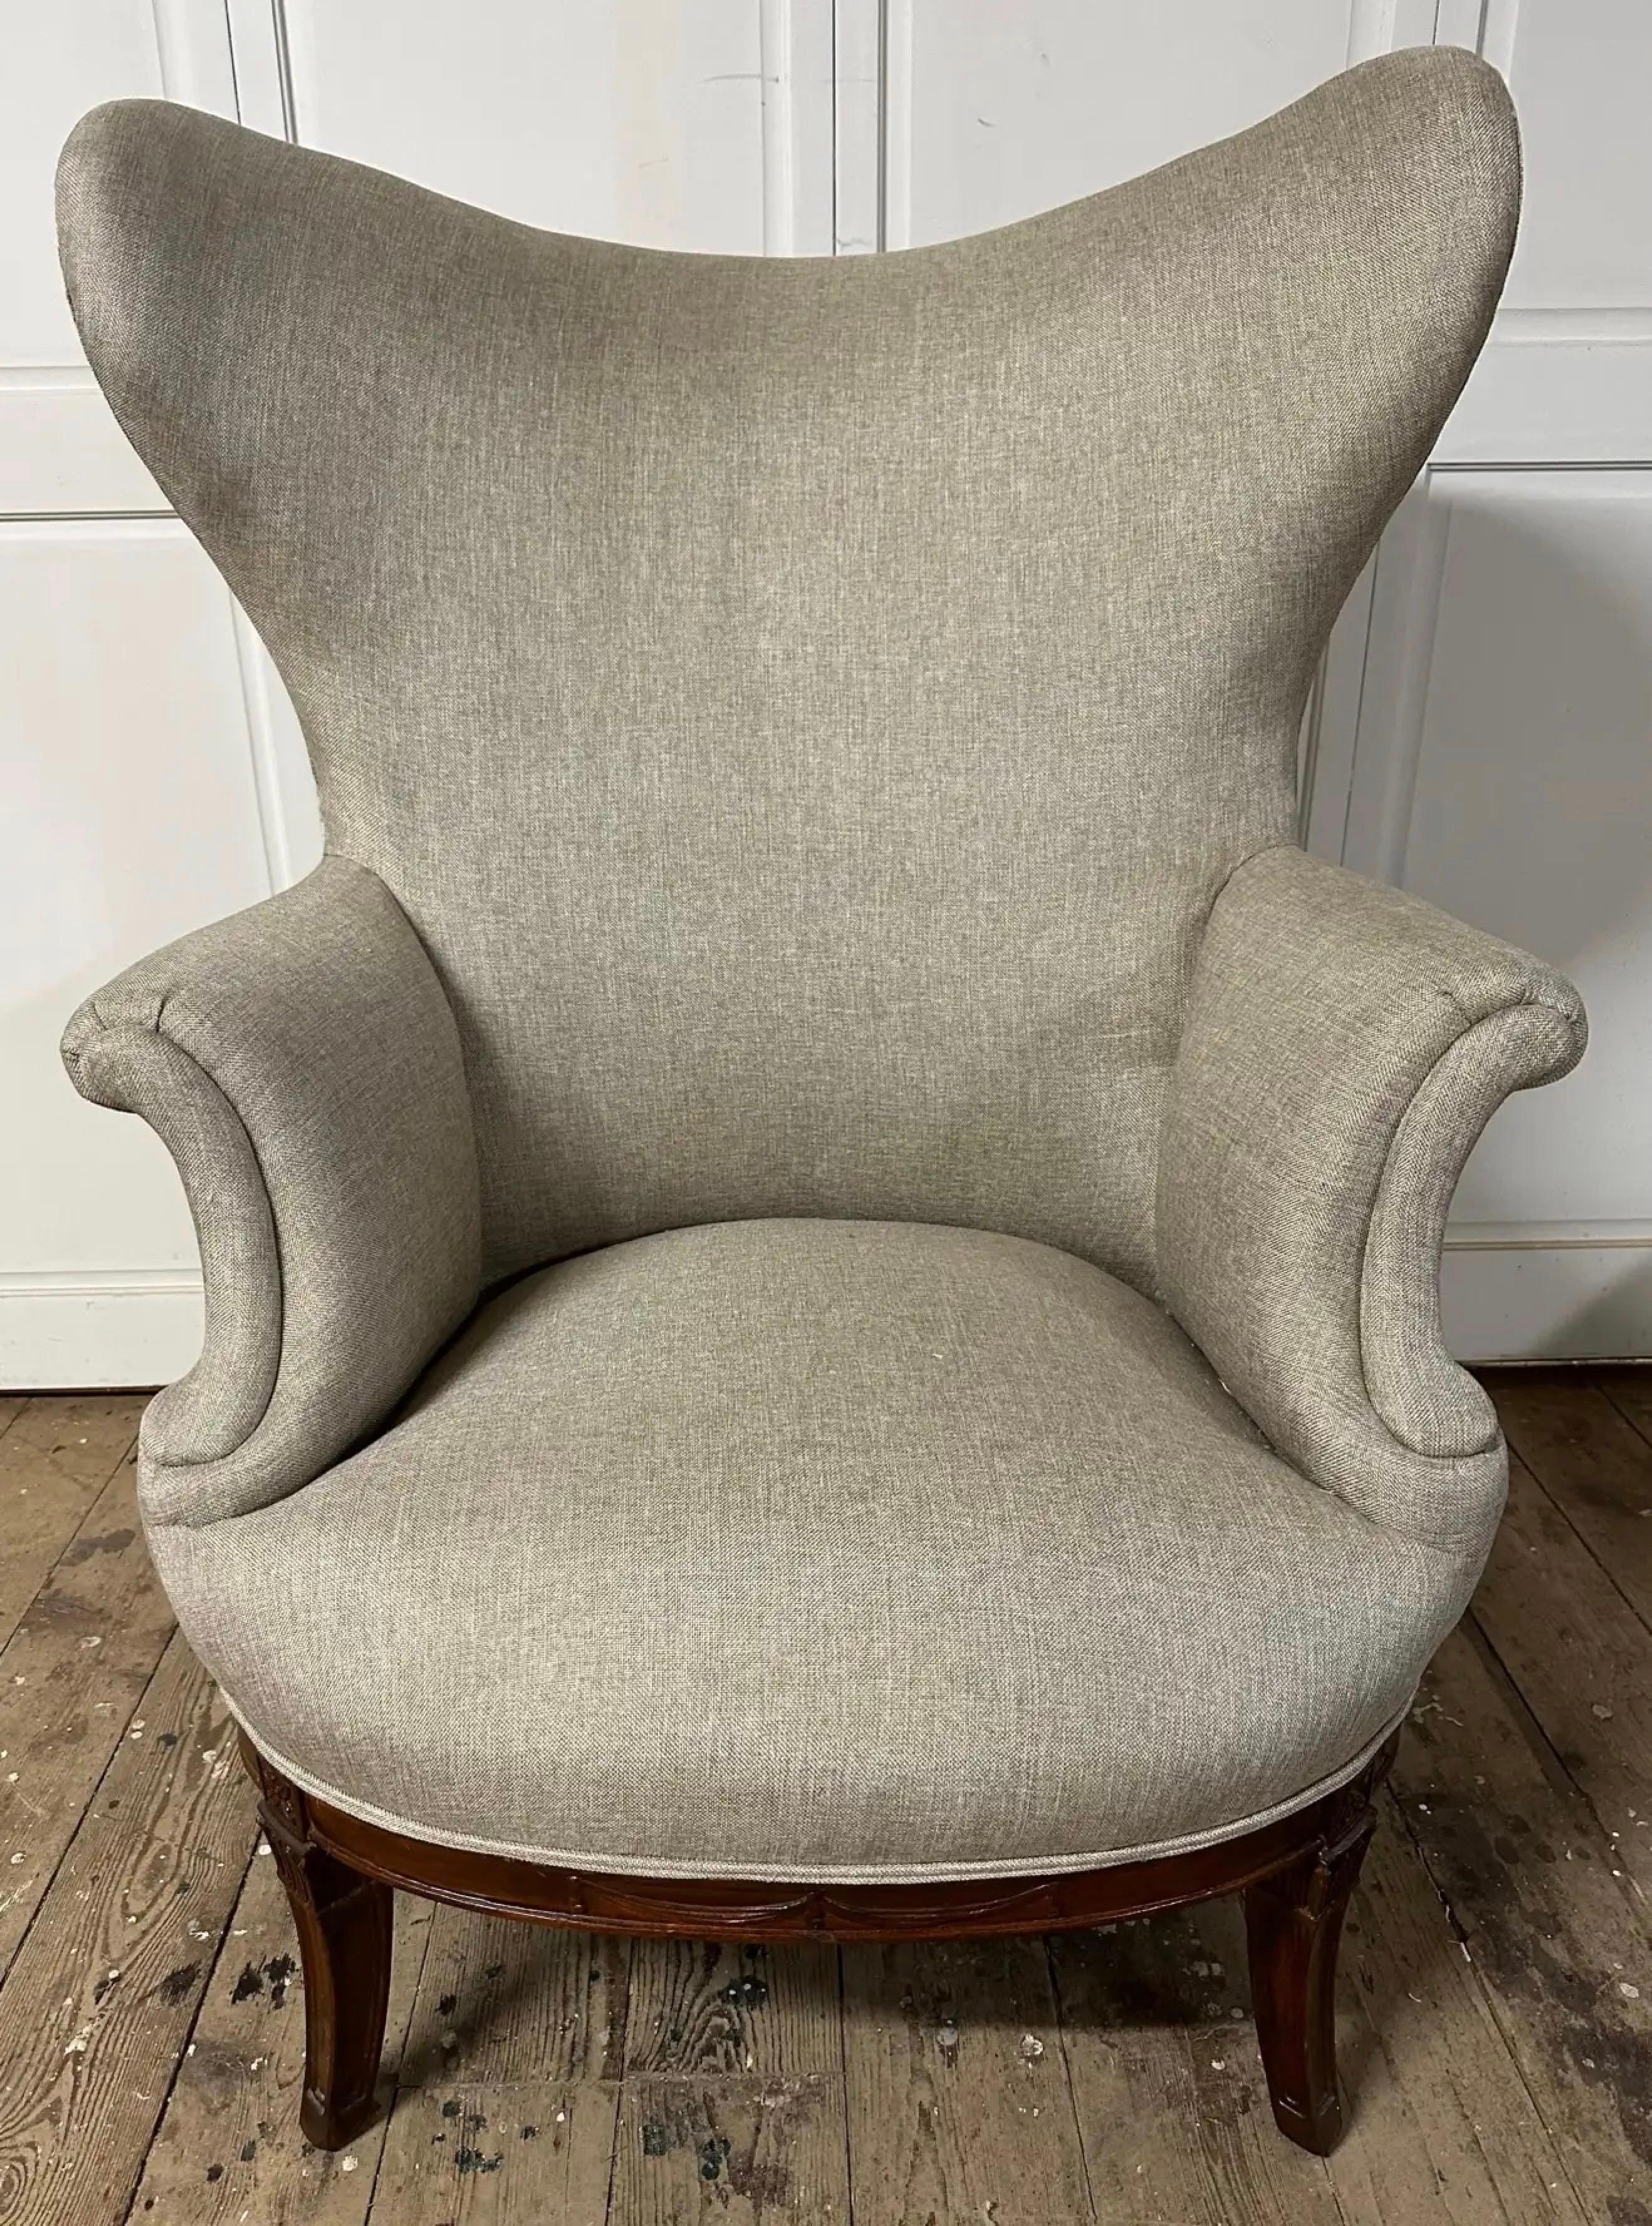 European Mid-Century Modern Butterfly Wingback Chair For Sale